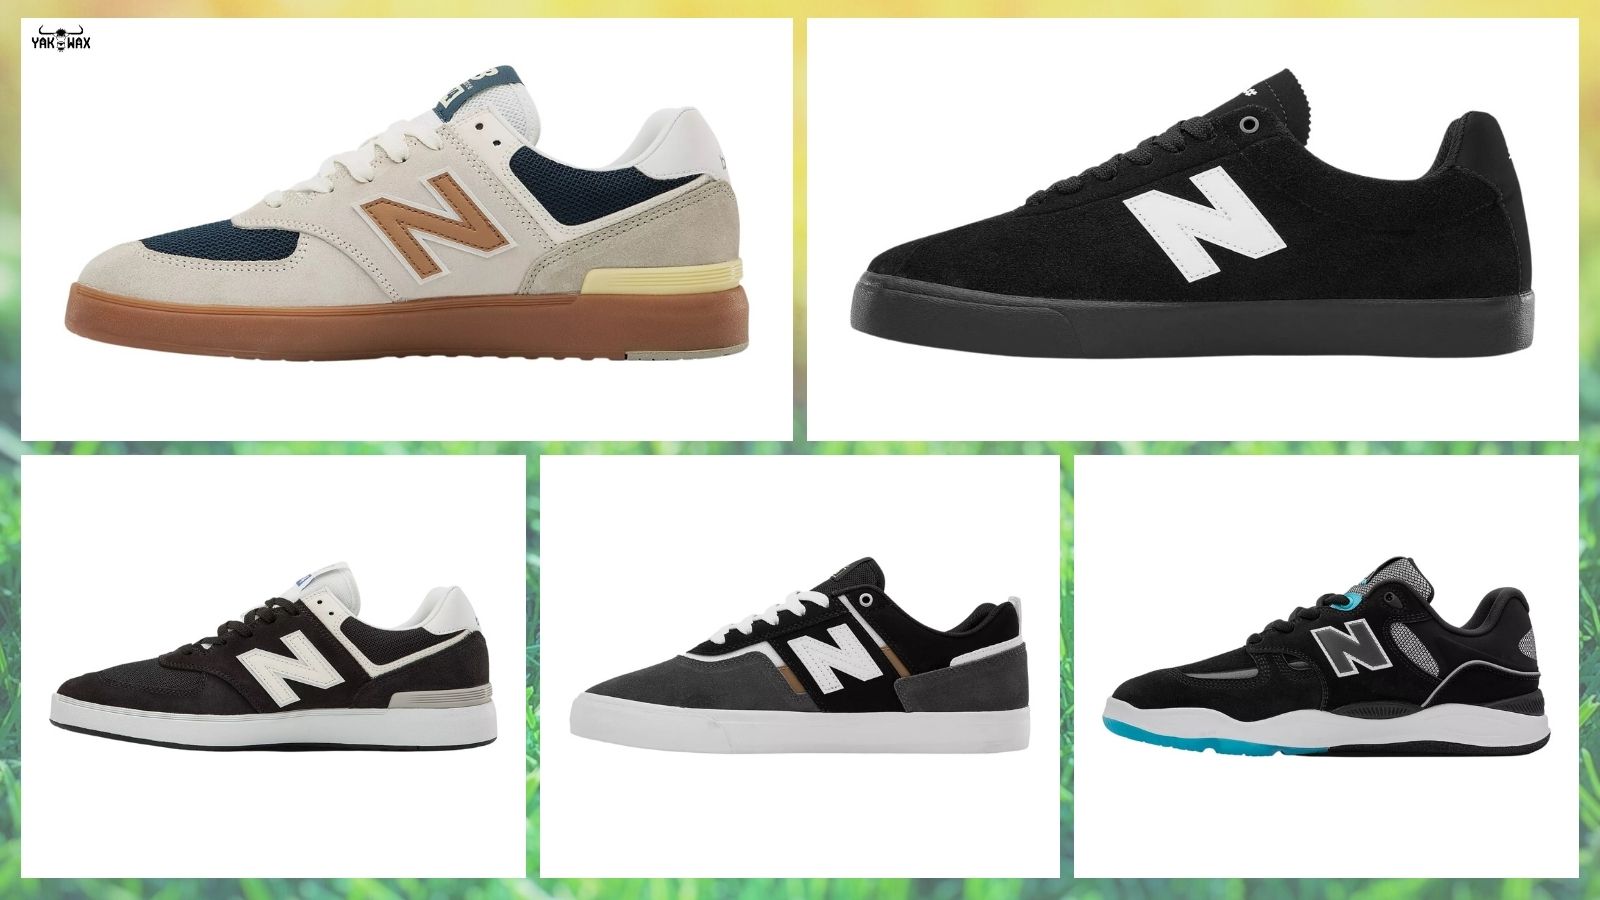 New-Balance-Numeric-Skate-Shoes-Spring-2021